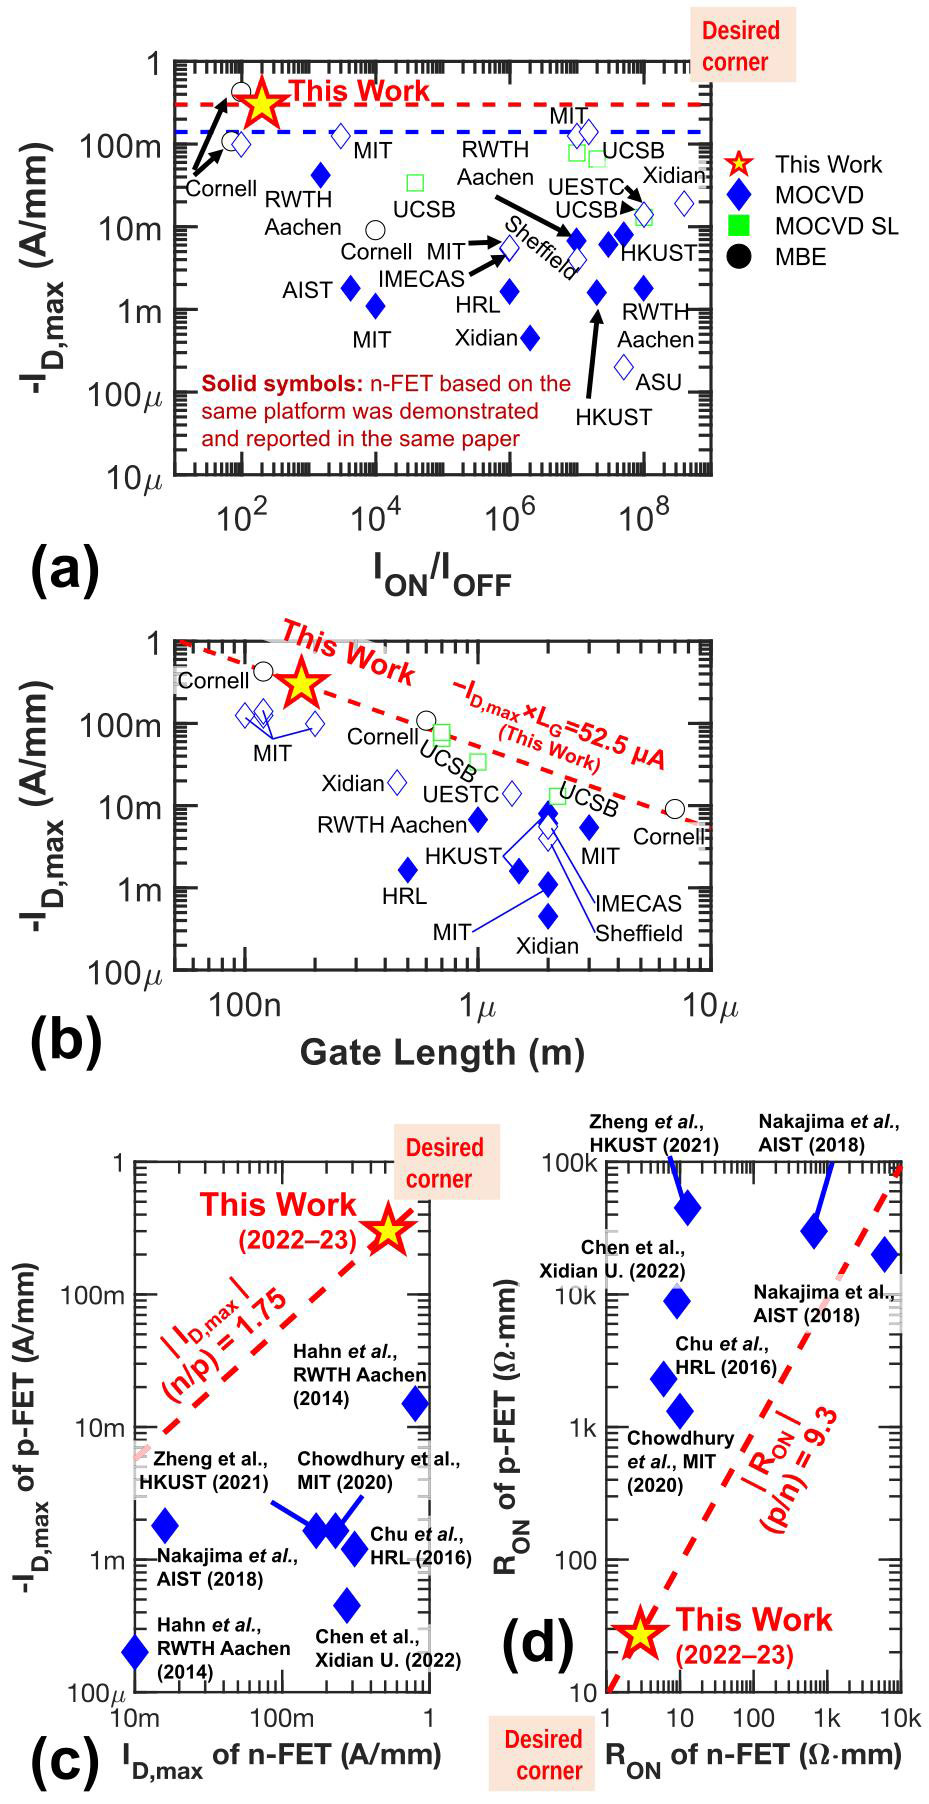 Figure 2: Benchmarks with other published works. (a) GaN p-FETs in terms of ON-current and ON/OFF ratio. (b) Trade-off between current density and gate length. (c) and (d) GaN CTs (complementary transistors reported in same article) in terms of current densities and RON, respectively. Solid symbols indicate complementary transistors (p-FET and n-FET) on the same platform demonstrated and reported in the same article. 